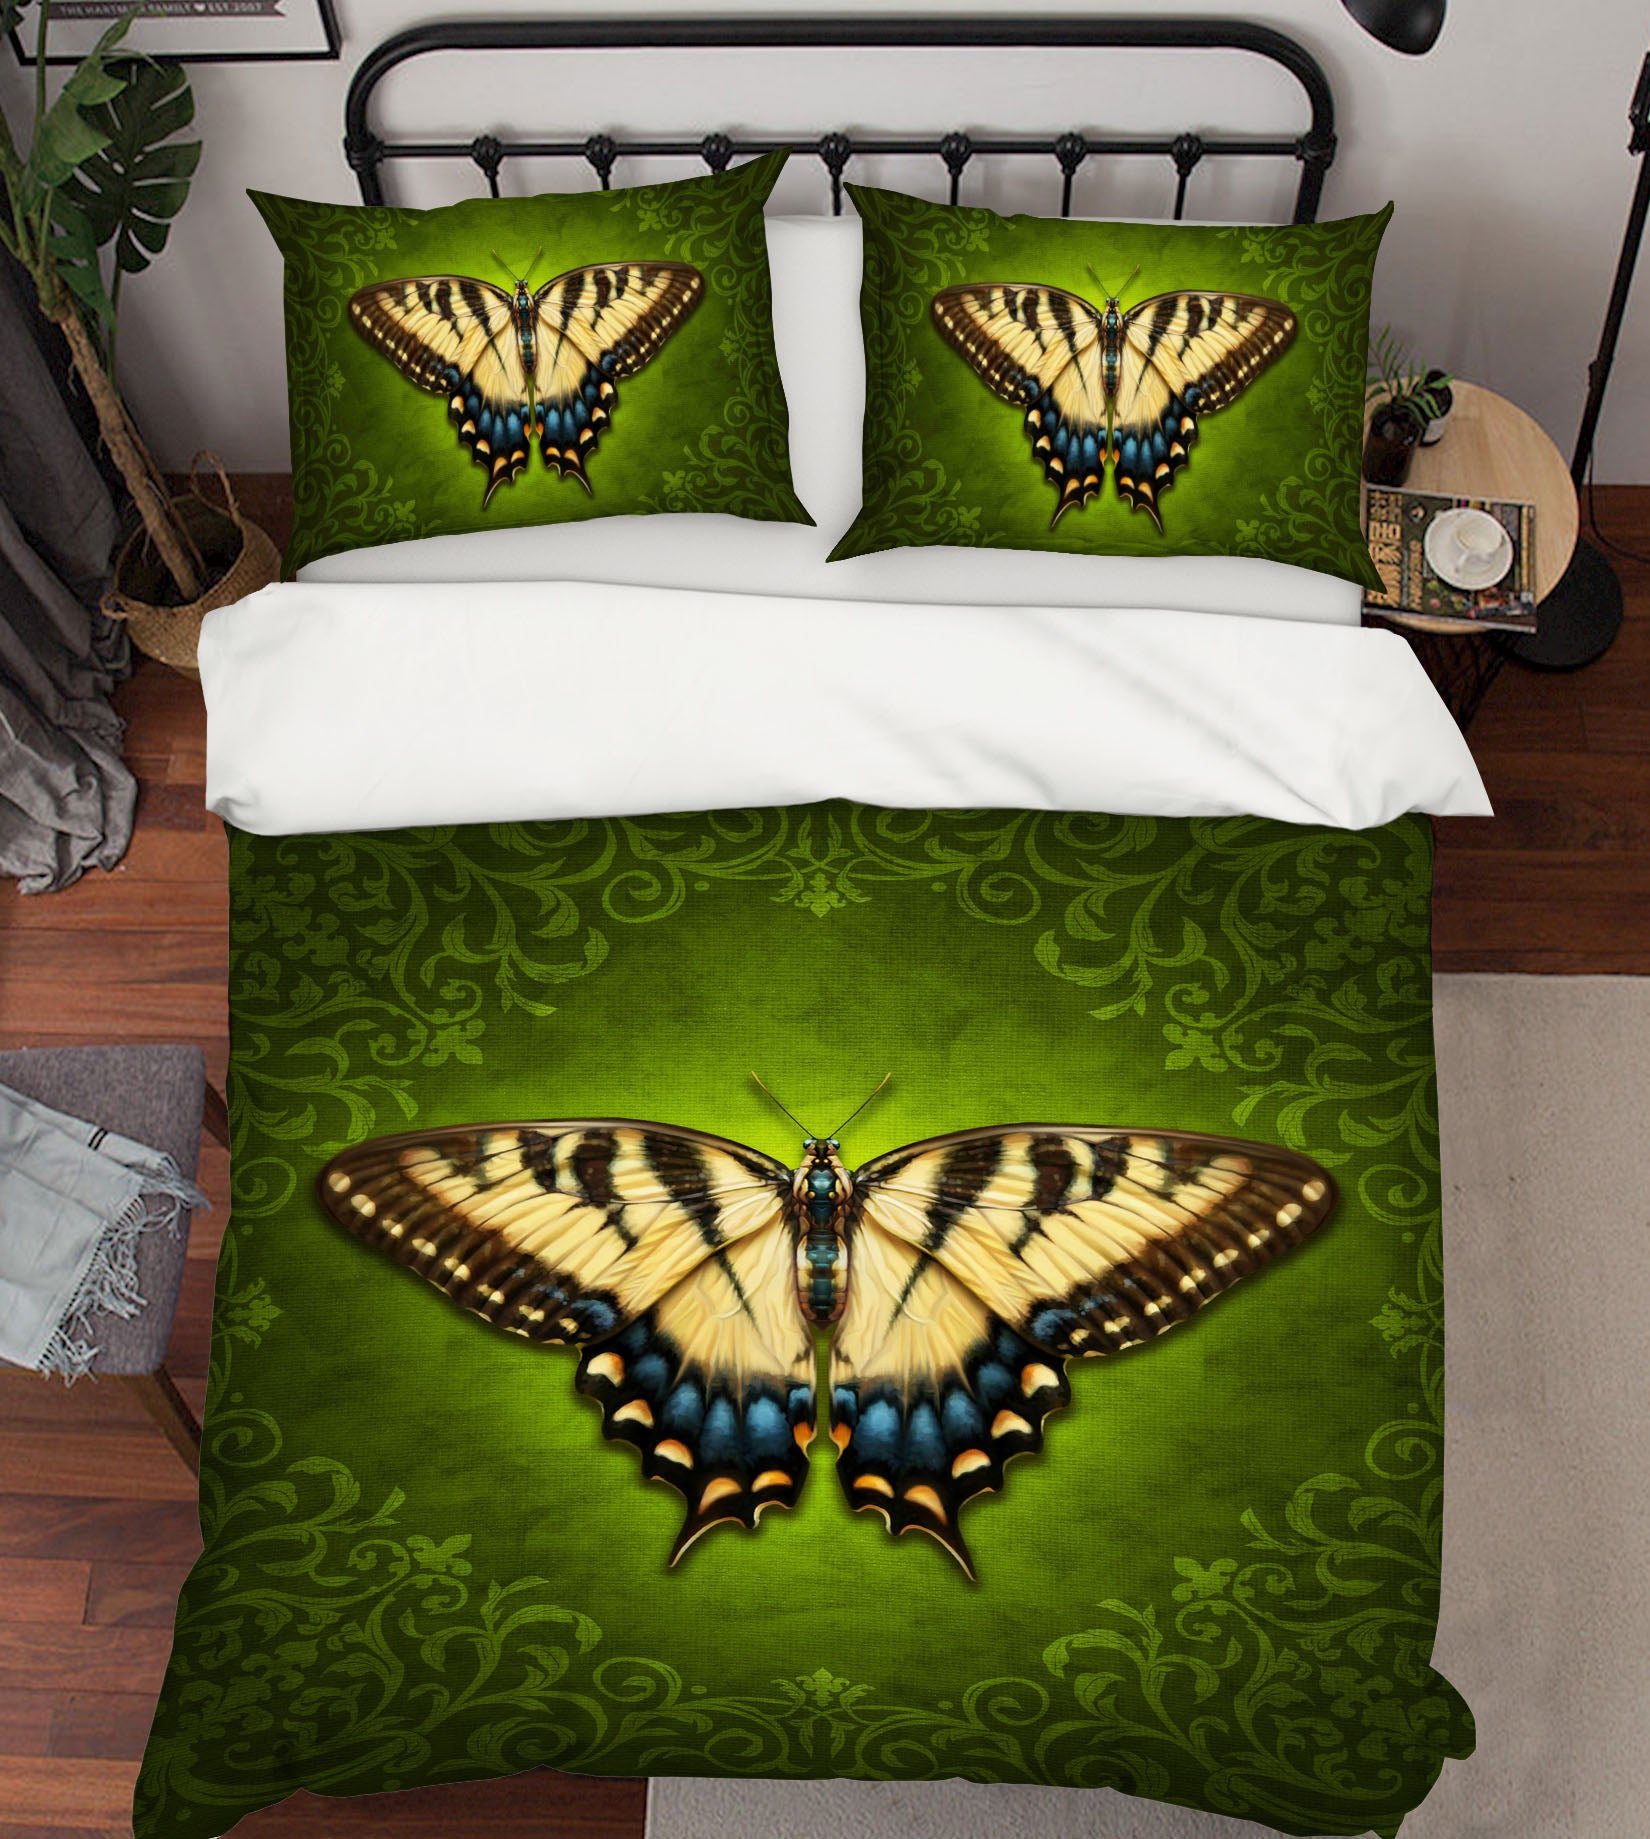 3D Butterfly Pattern 8833 Brigid Ashwood Bedding Bed Pillowcases Quilt Cover Duvet Cover